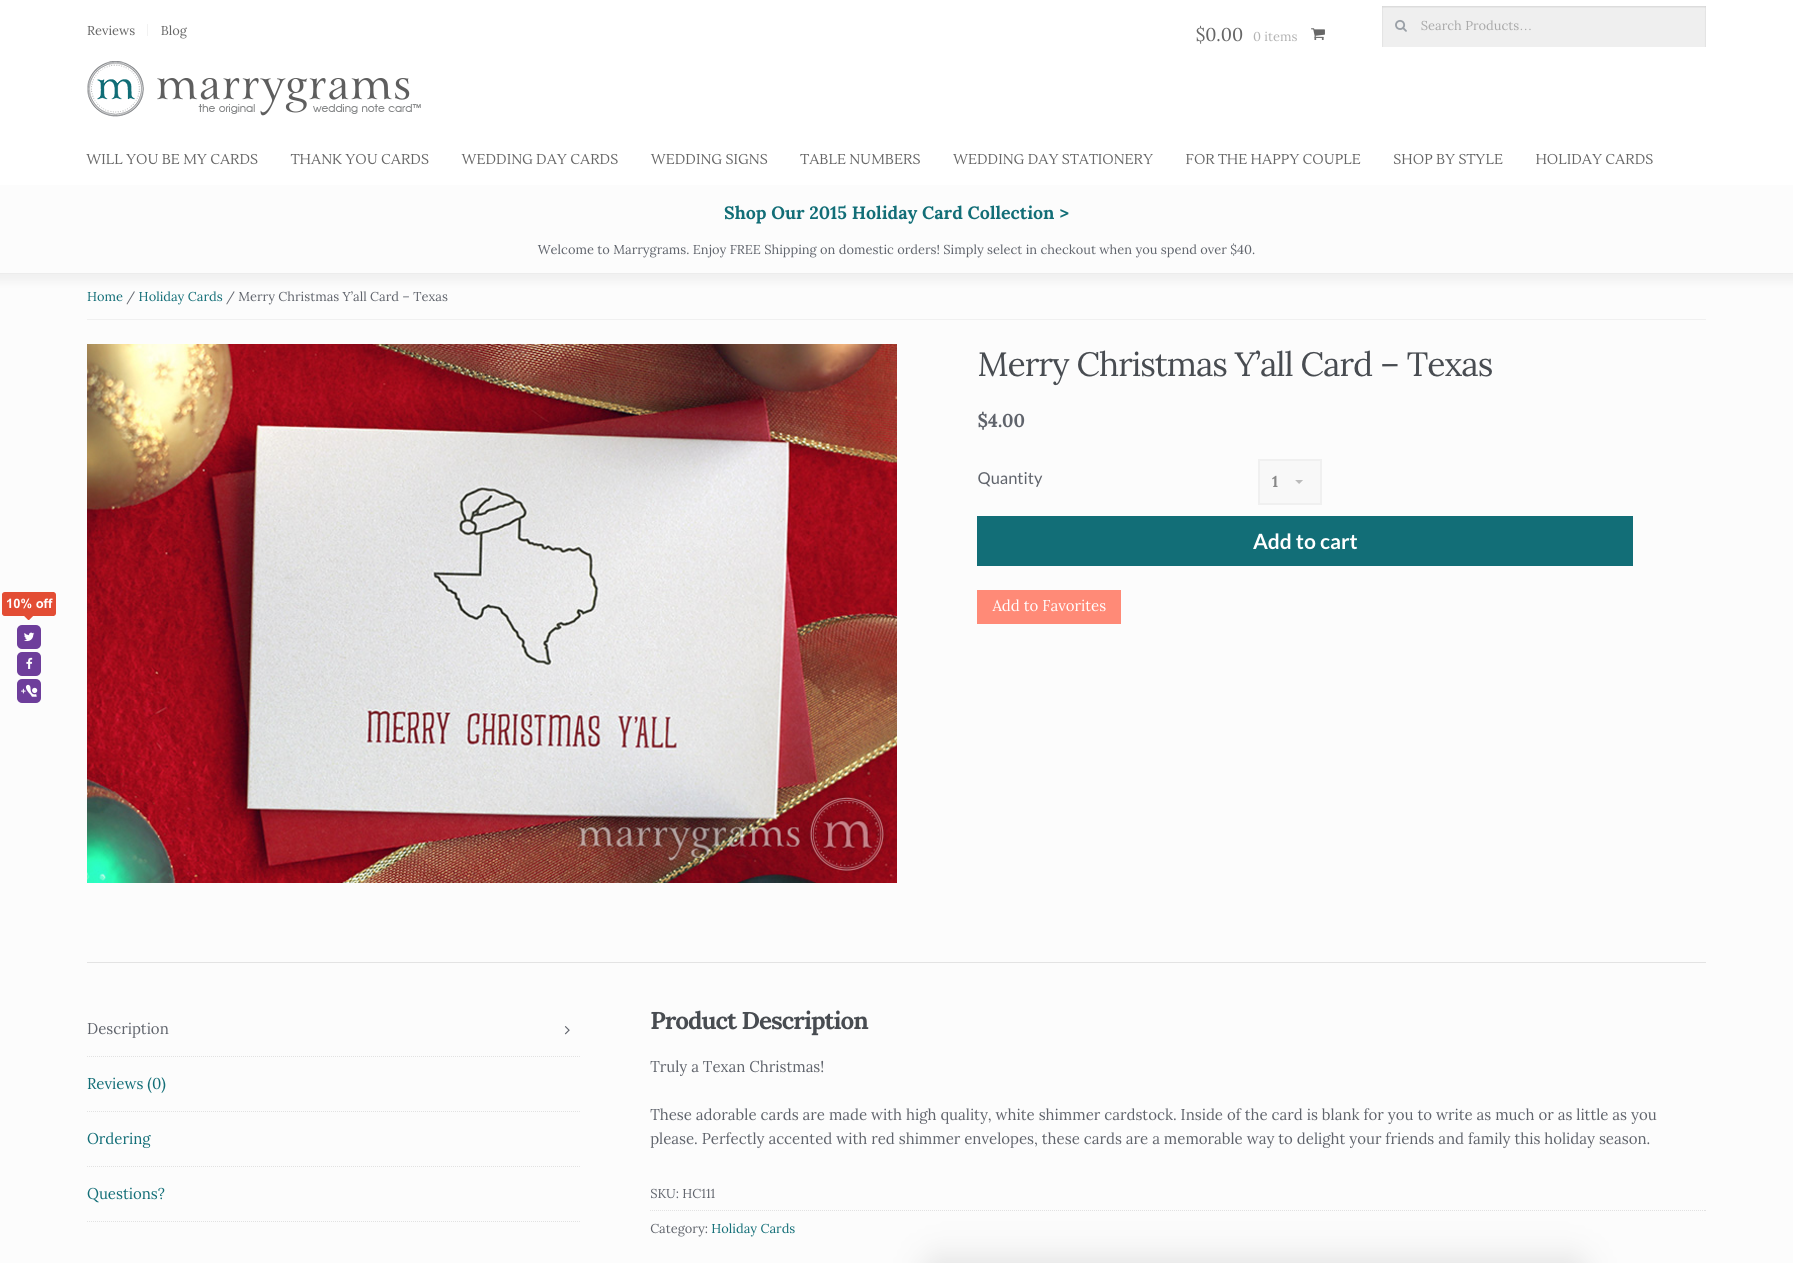 Marrygrams uses Storefront to make their shop delightful.